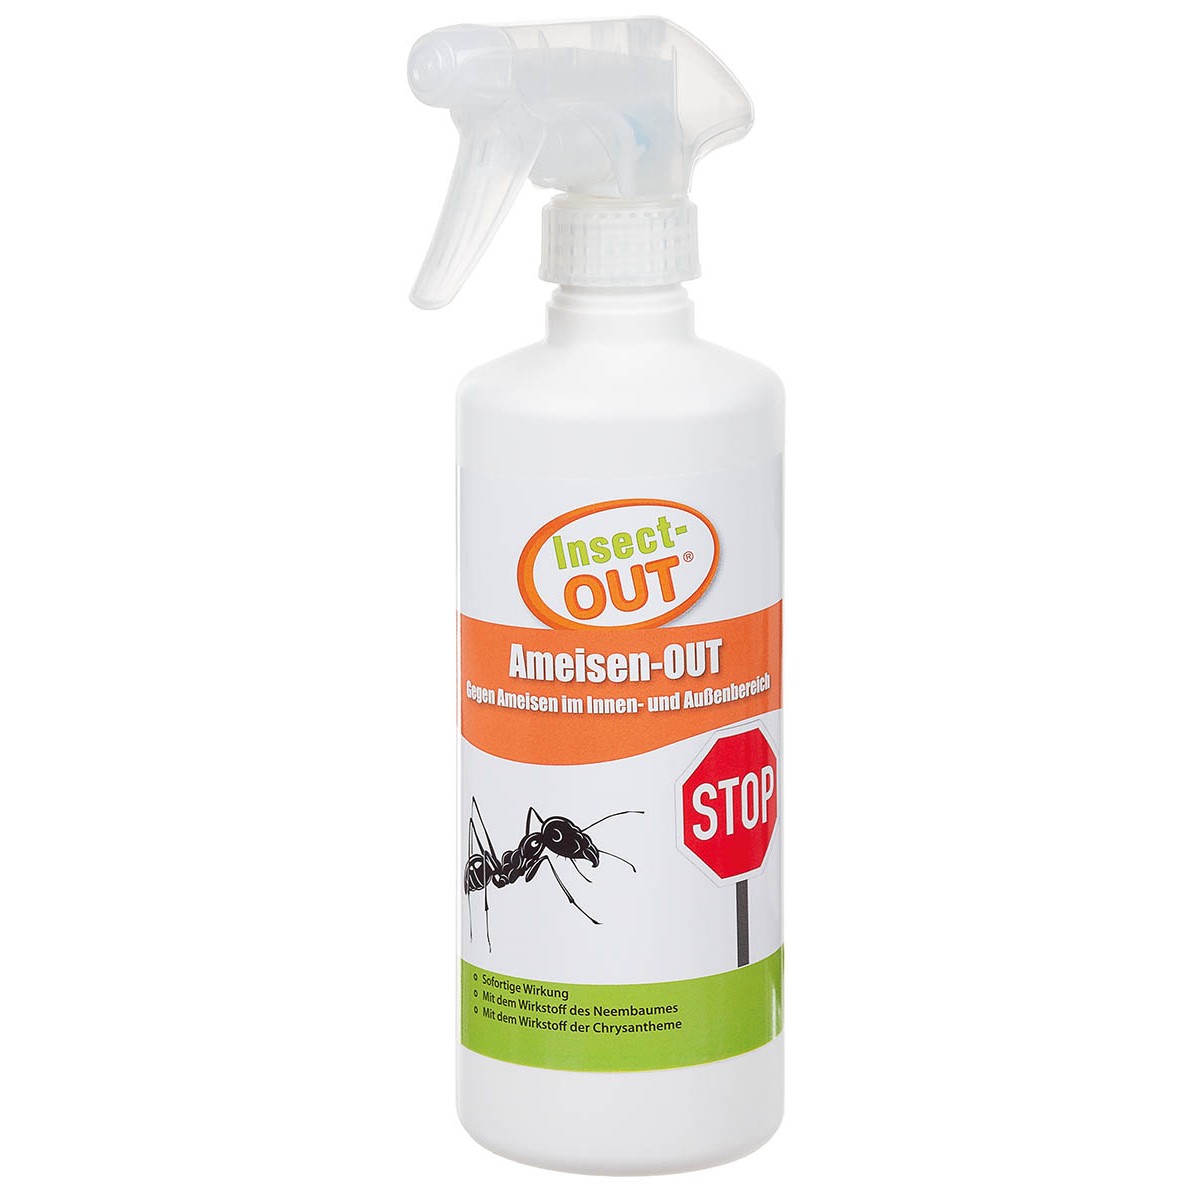 Insect-OUT Ameisenspray 500ml